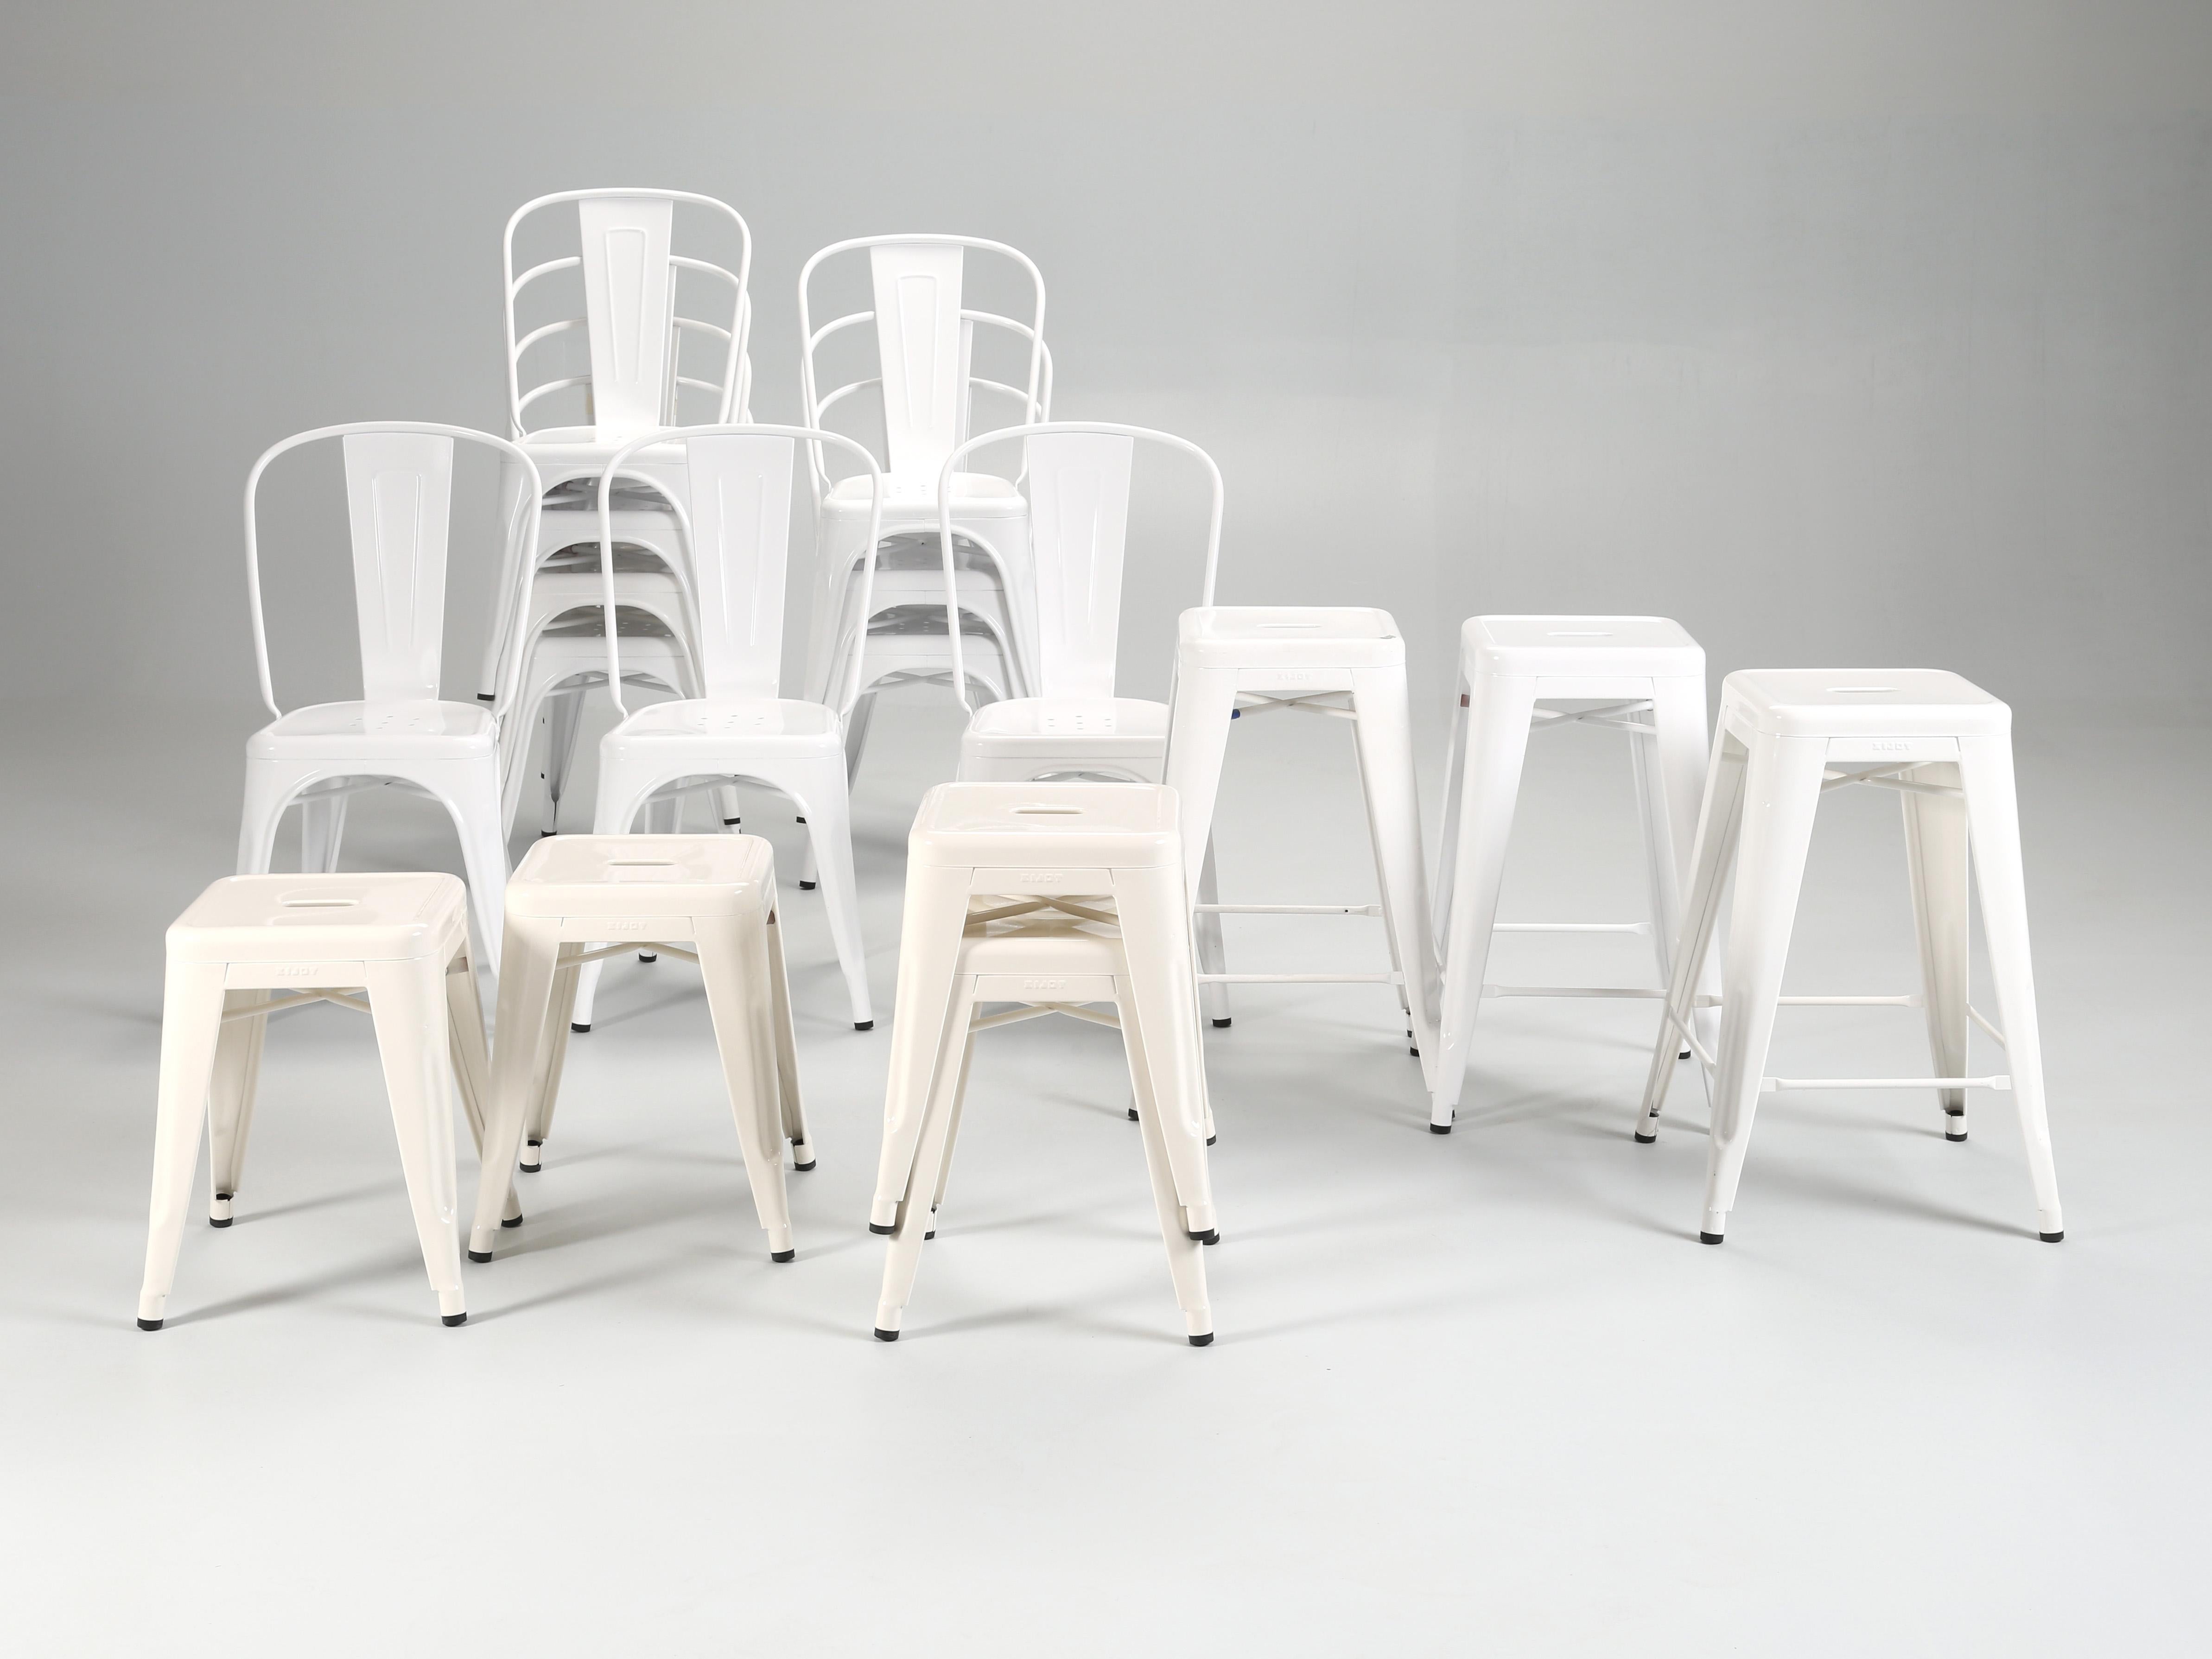 Genuine French Made Tolix Steel Chairs Stackable '12' High, Hundred's Available 11